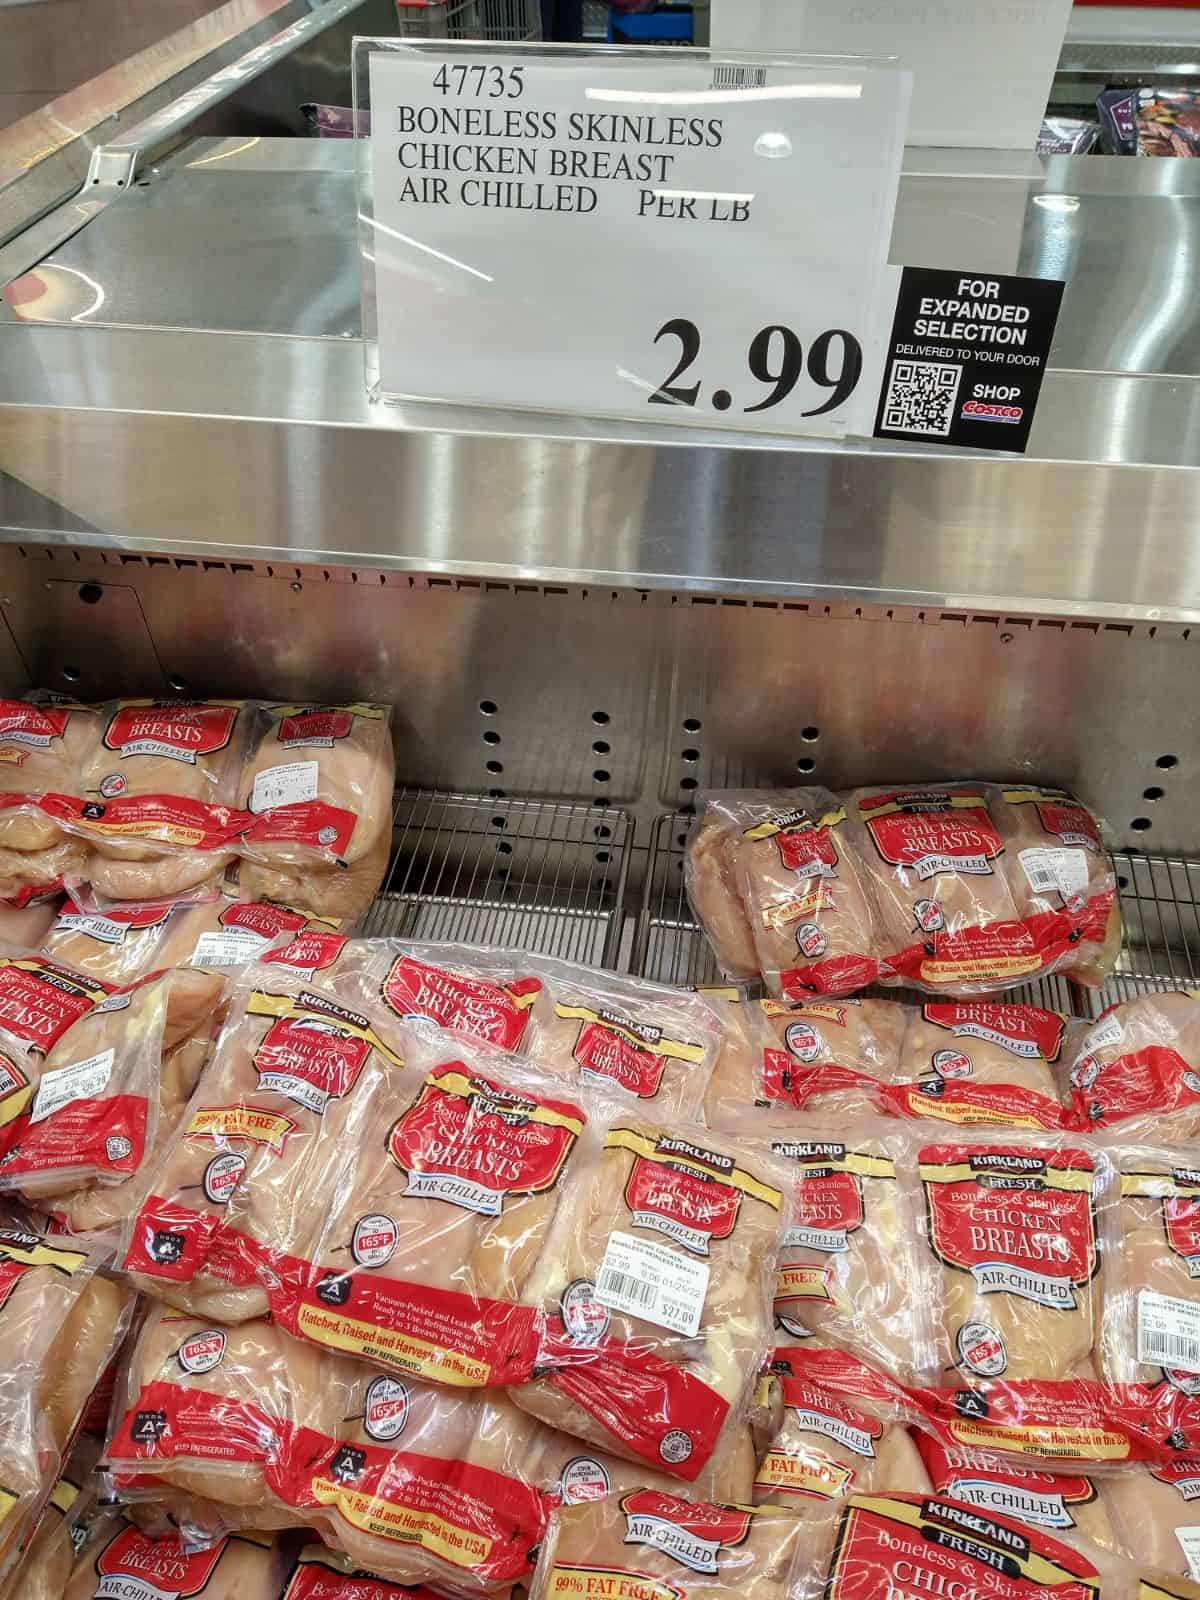 Kirkland Boneless Skinless chicken breasts in packaging in refrigerated display at Costco. A sign shows the chicken costs $2.99/lb.